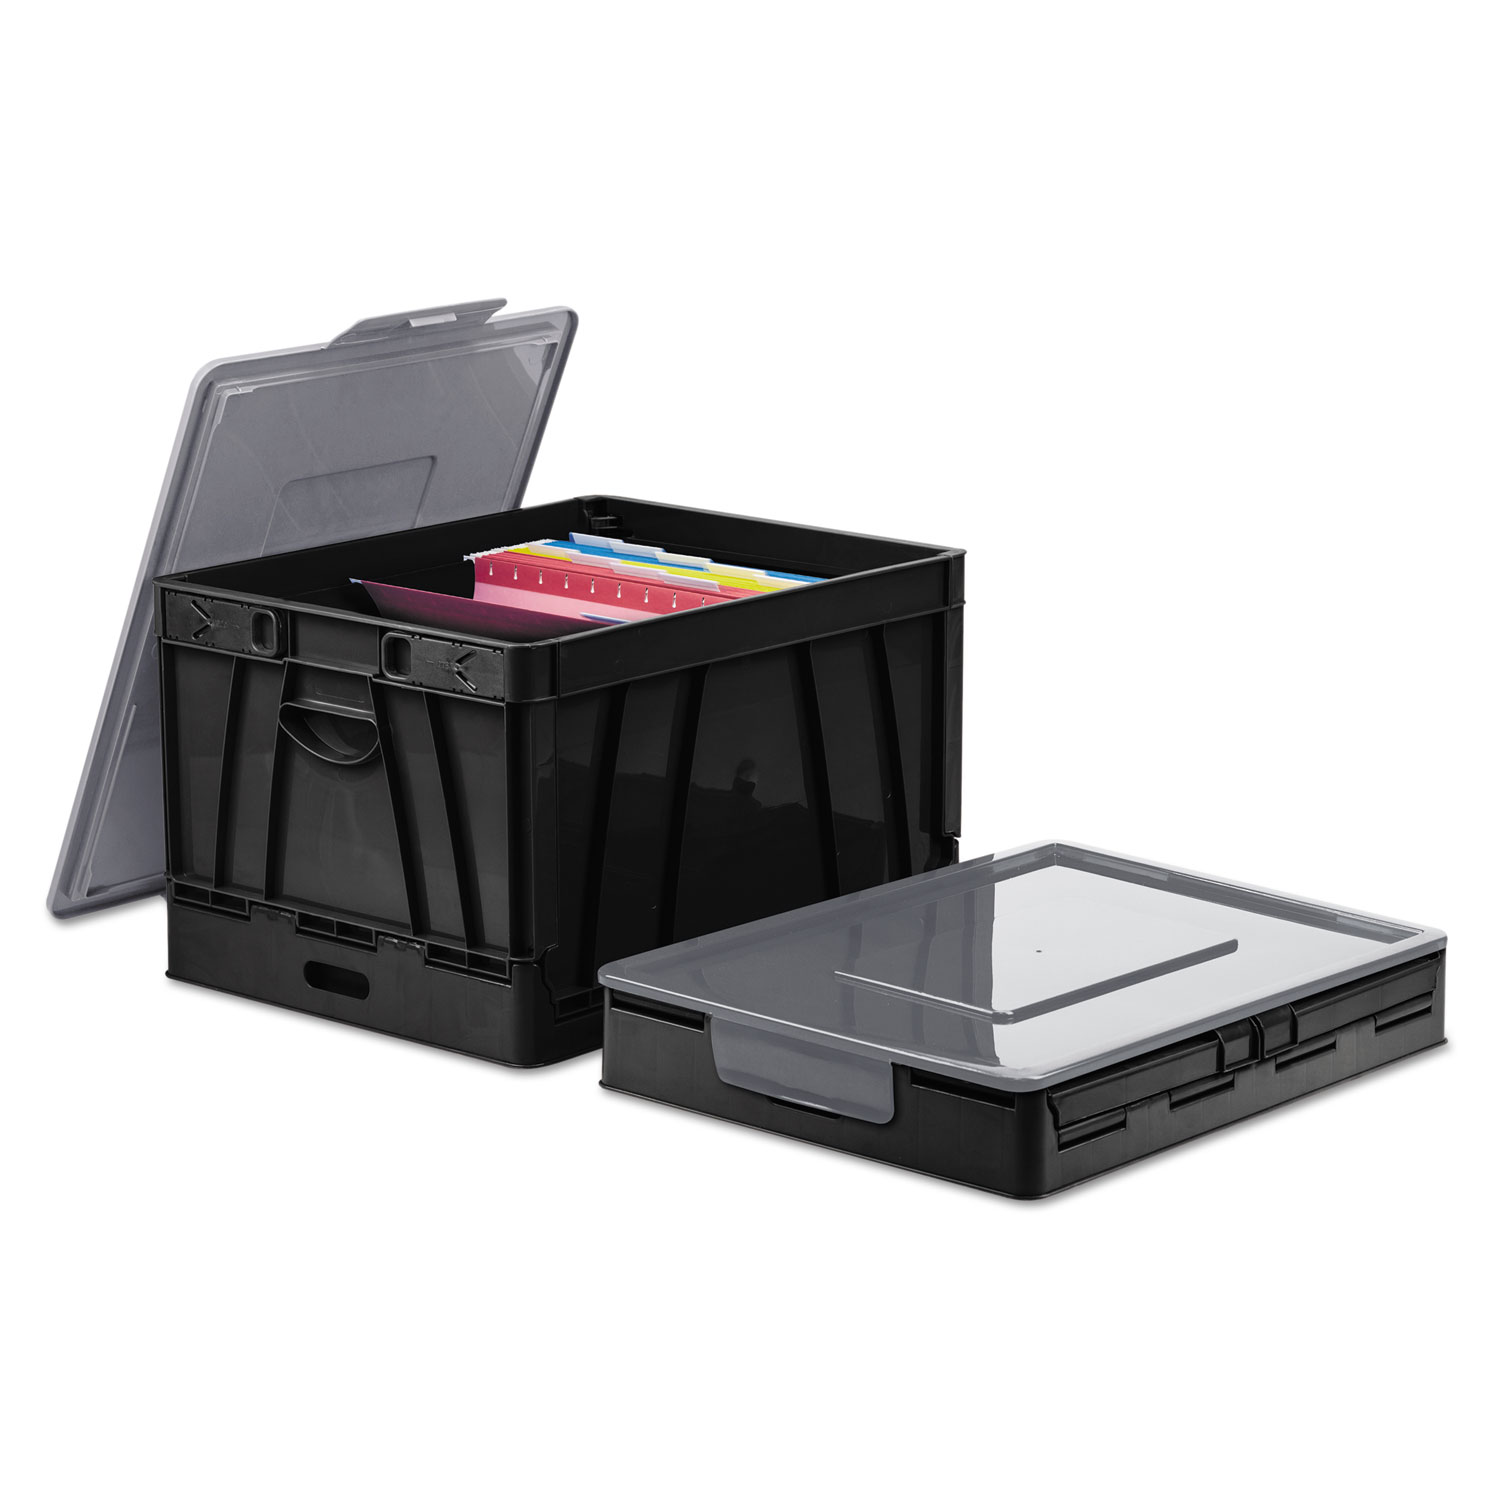  Universal UNV40010 Collapsible Crate, Letter/Legal Files, 17.25 x 14.25 x 10.5, Black/Gray, 2/Pack (UNV40010) 